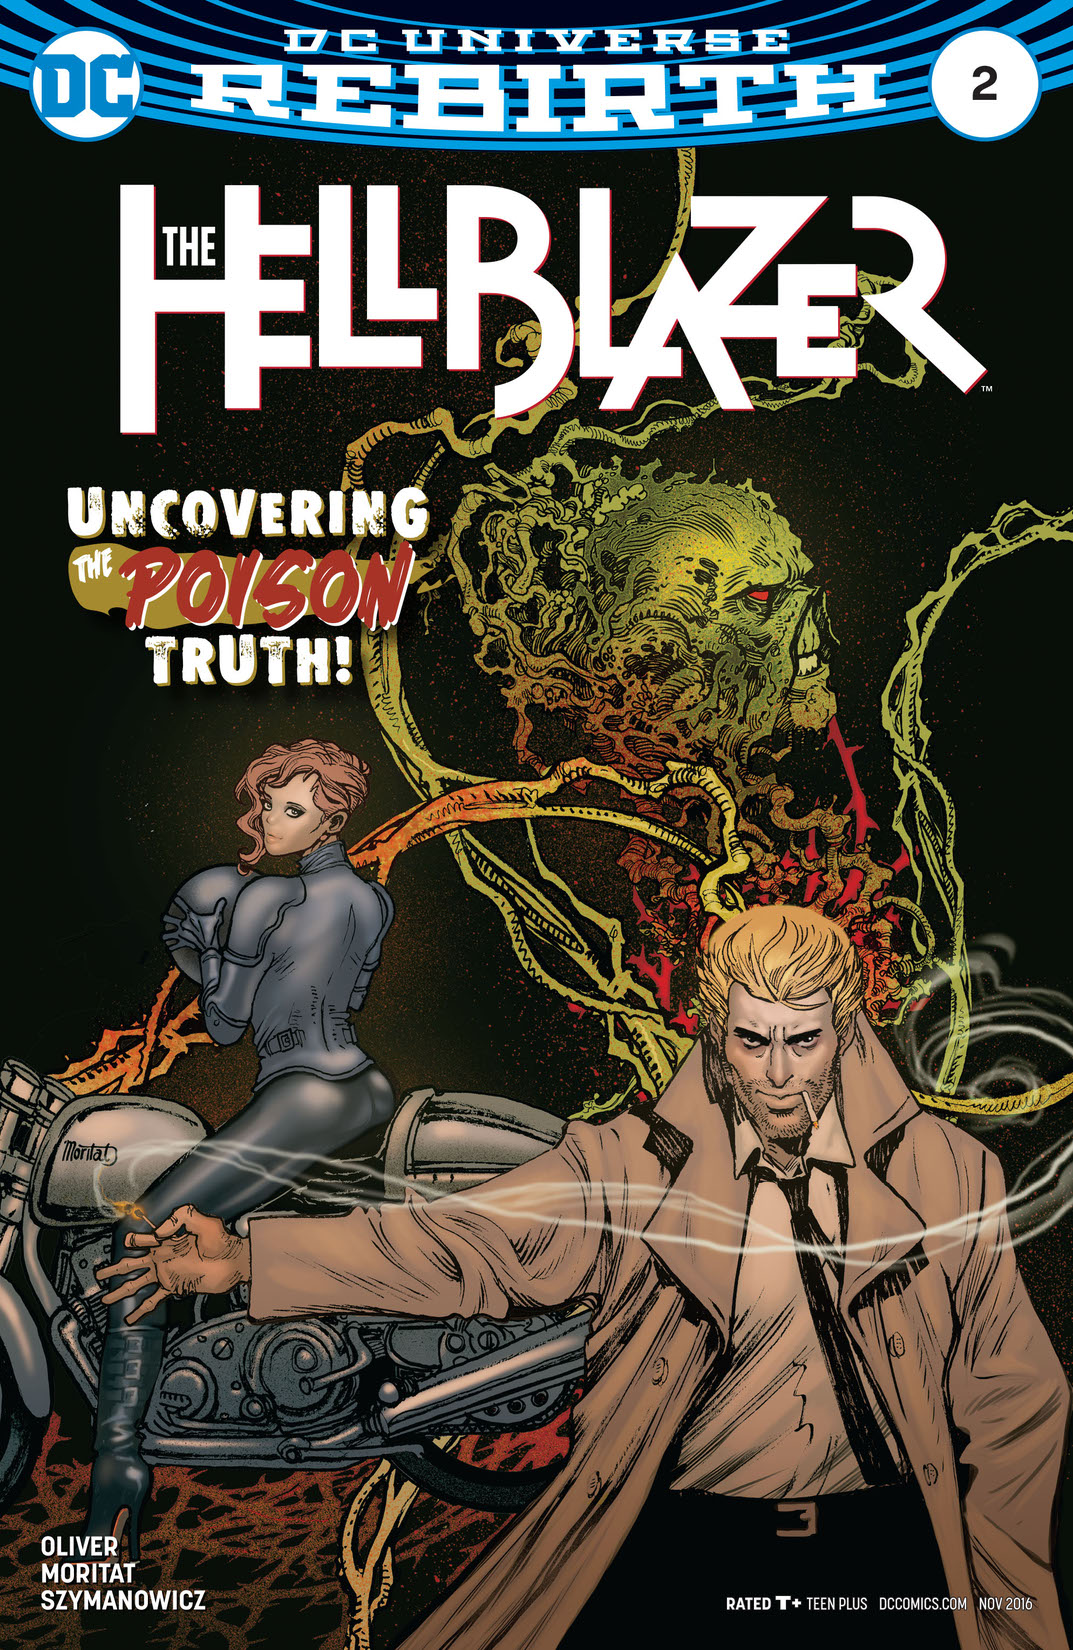 The Hellblazer #2 preview images